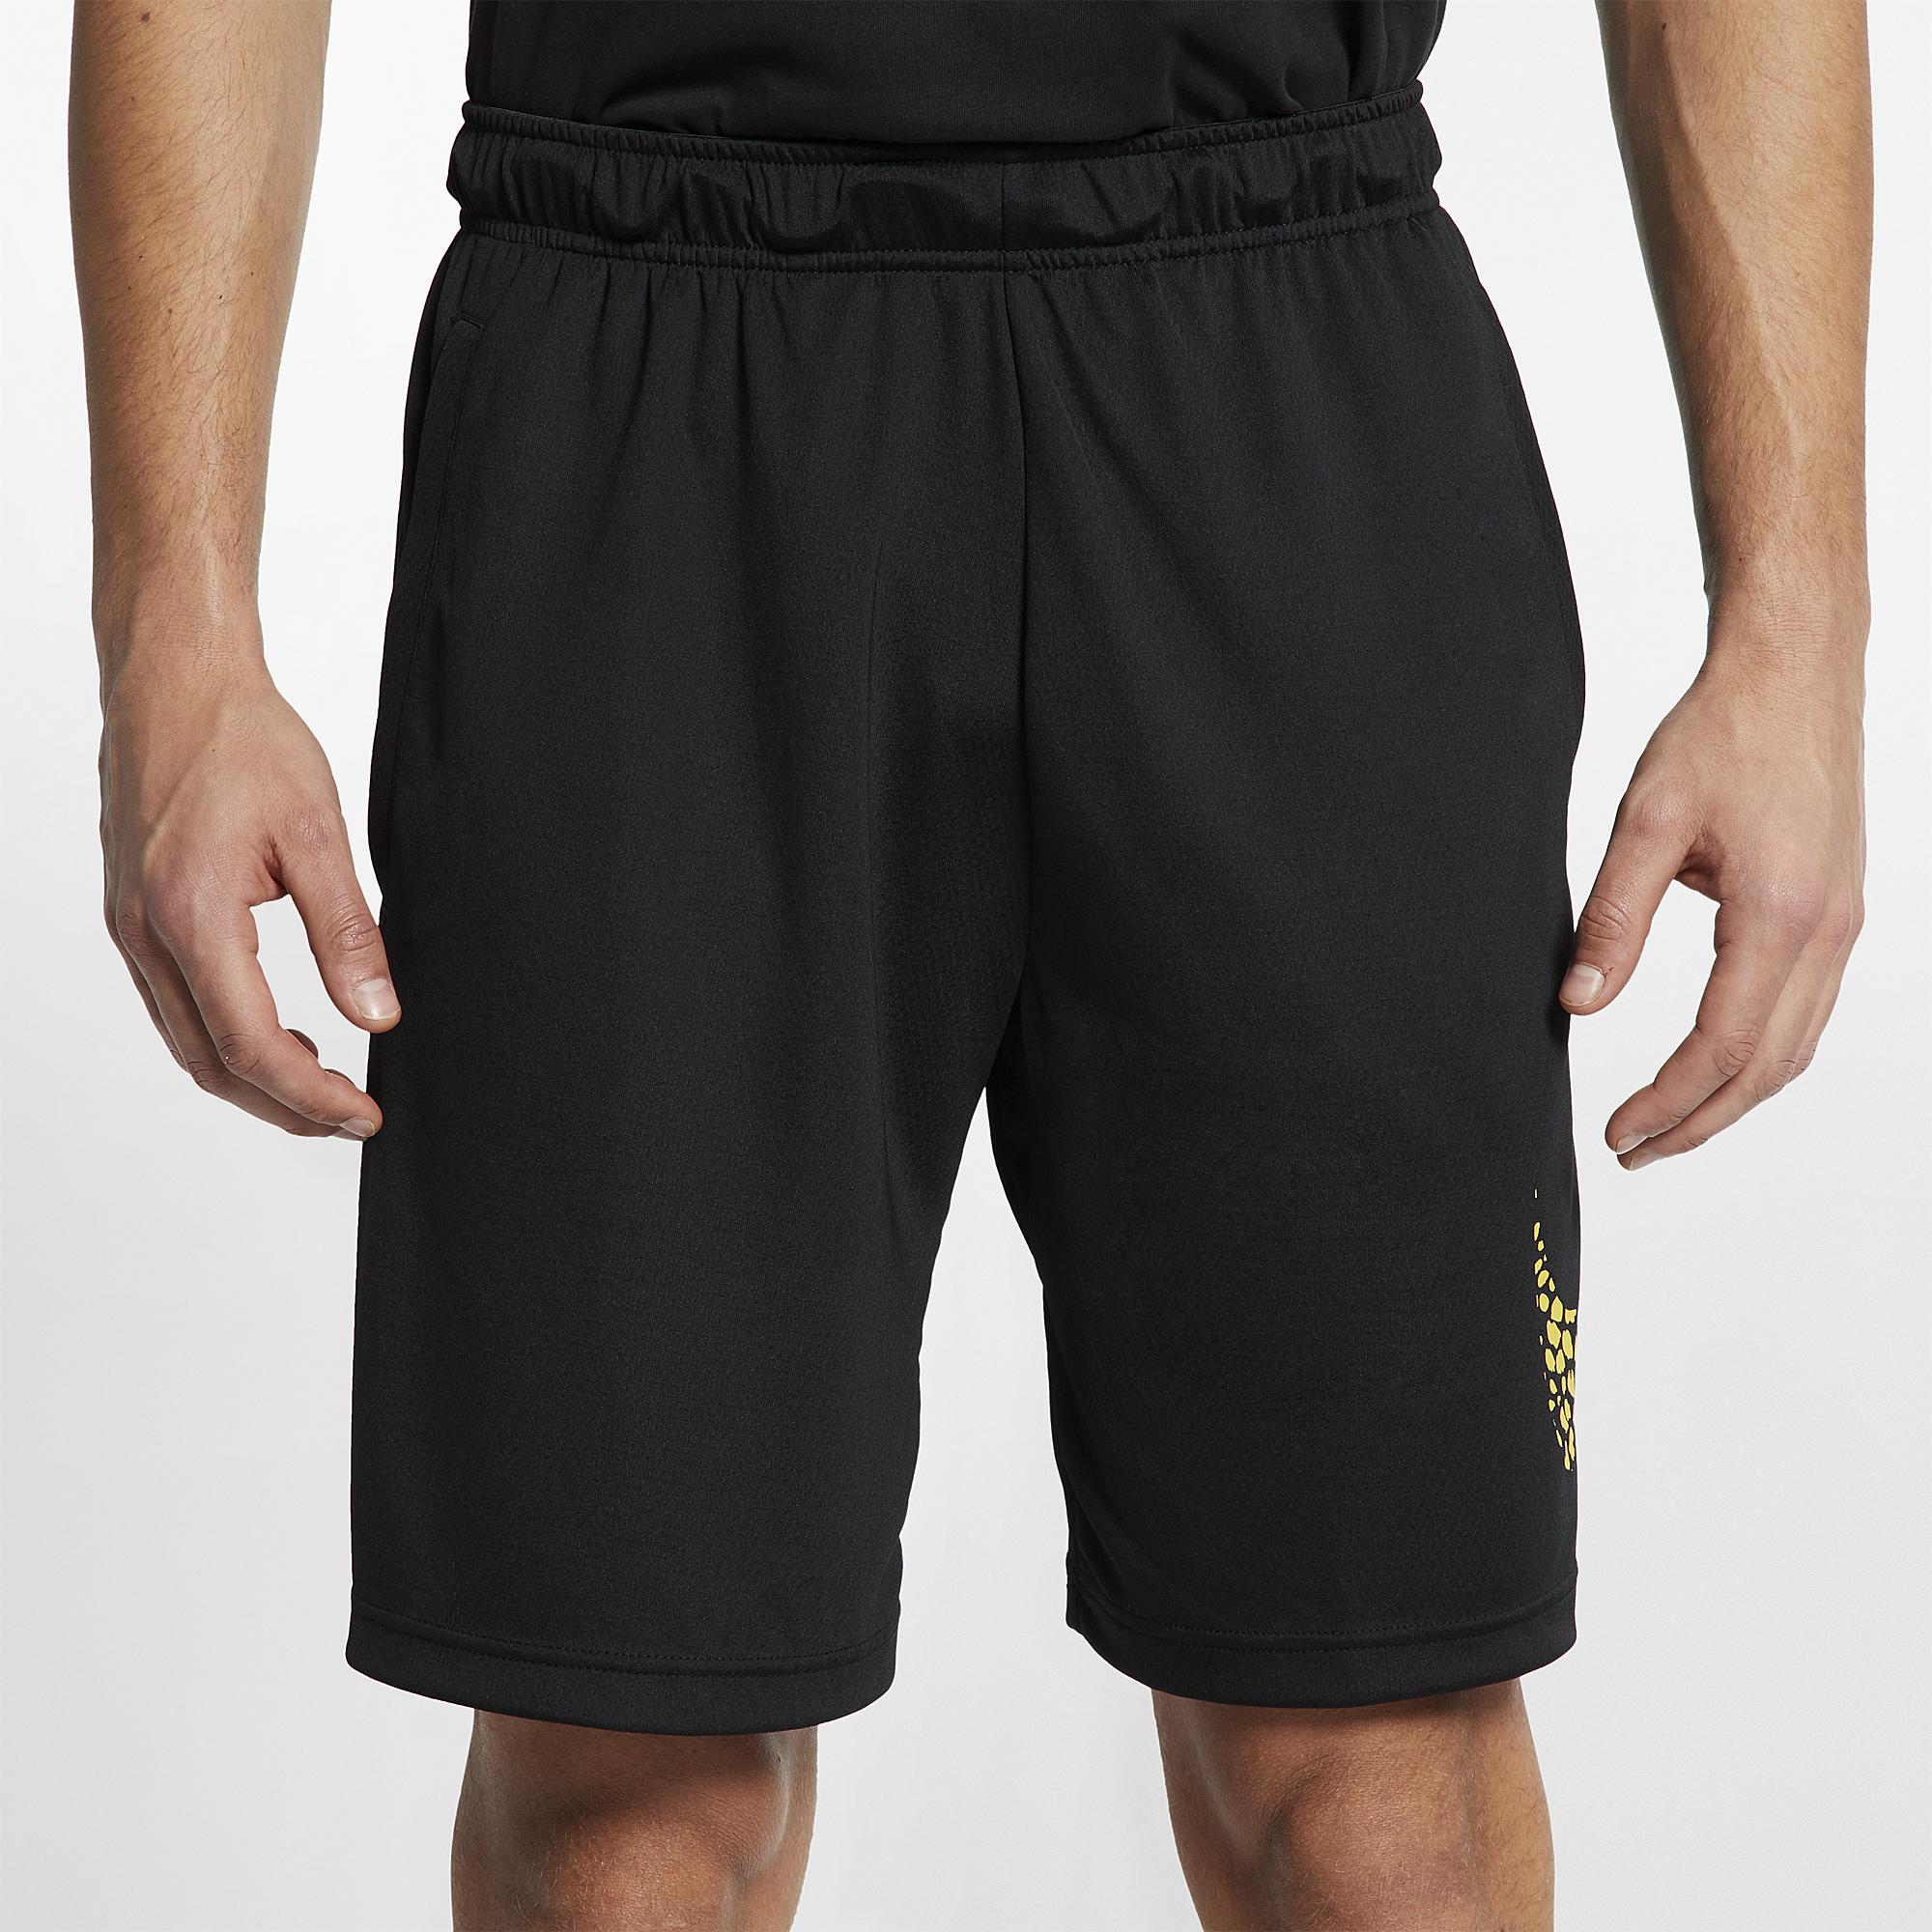 nike fly shorts 4.0 Sale,up to 31 